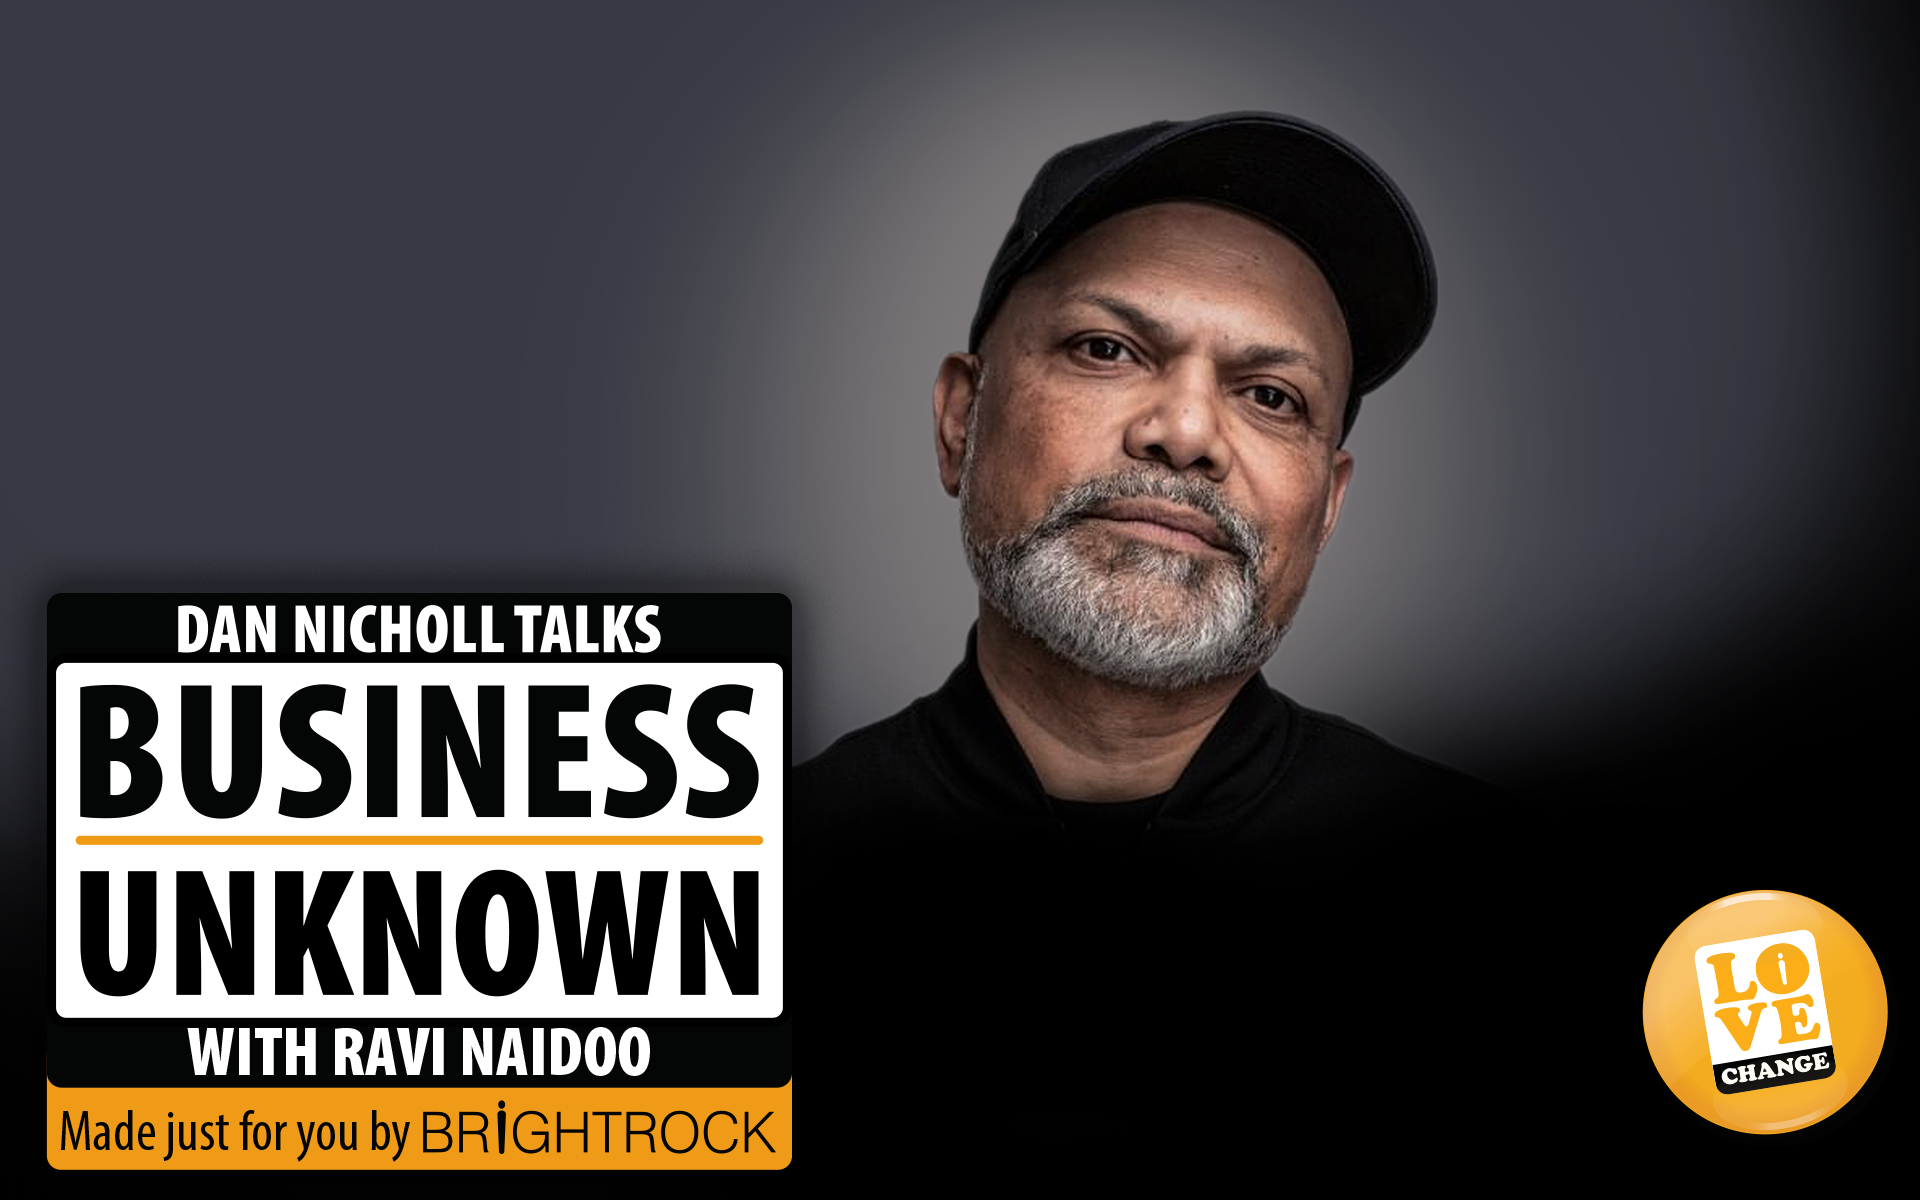 Business Unknown Episode 2 with Ravi Naidoo